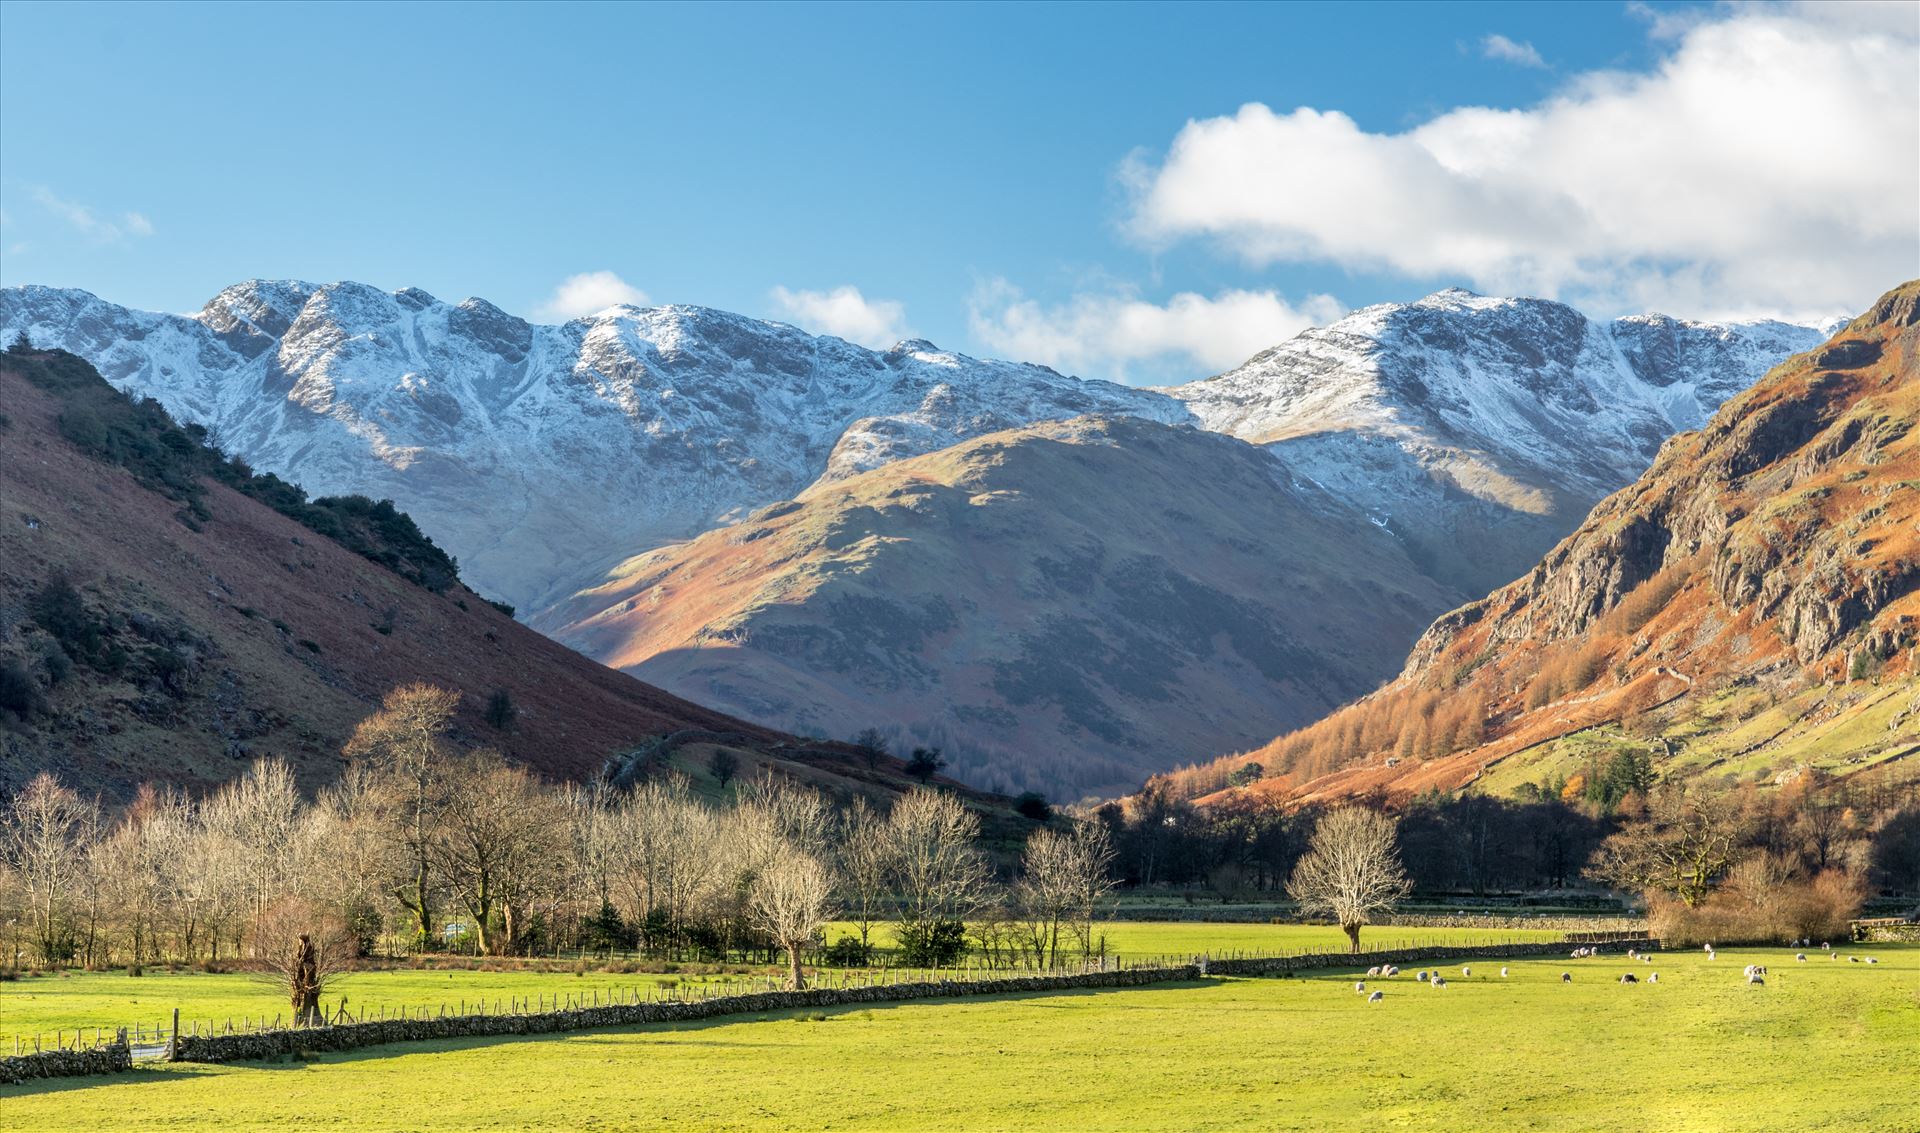 Langdale Pikes En route to the Langdale Pikes and Blea Tarn in the Lake District by Tony Keogh Photography